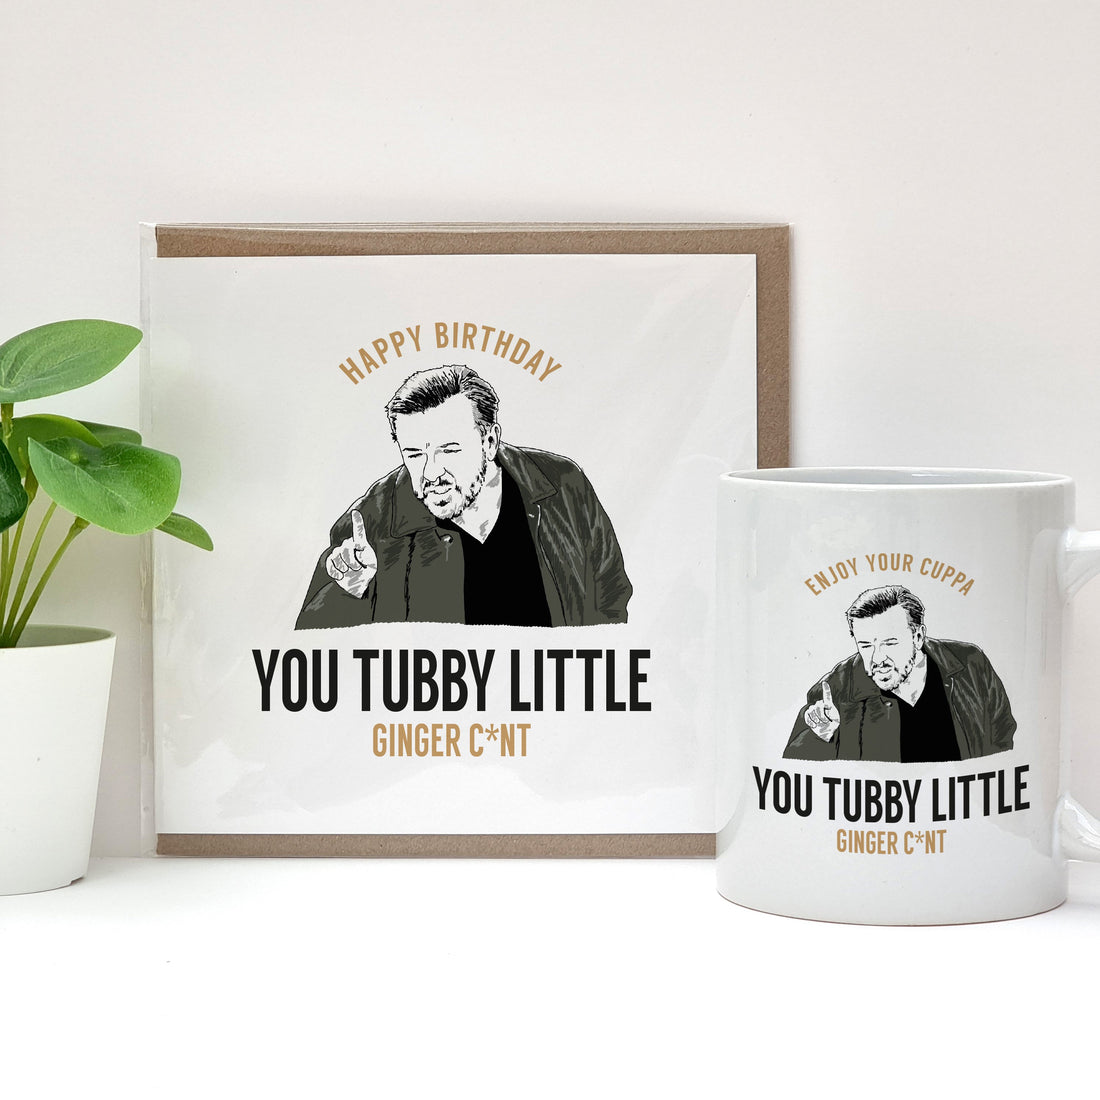 funny birthday card and coffee cup merchandise based on the tv show after life featuring illustrations of the creator and actor ricky gervais. Based on the scene where tony calls a schooy a tubby little ginger cunt